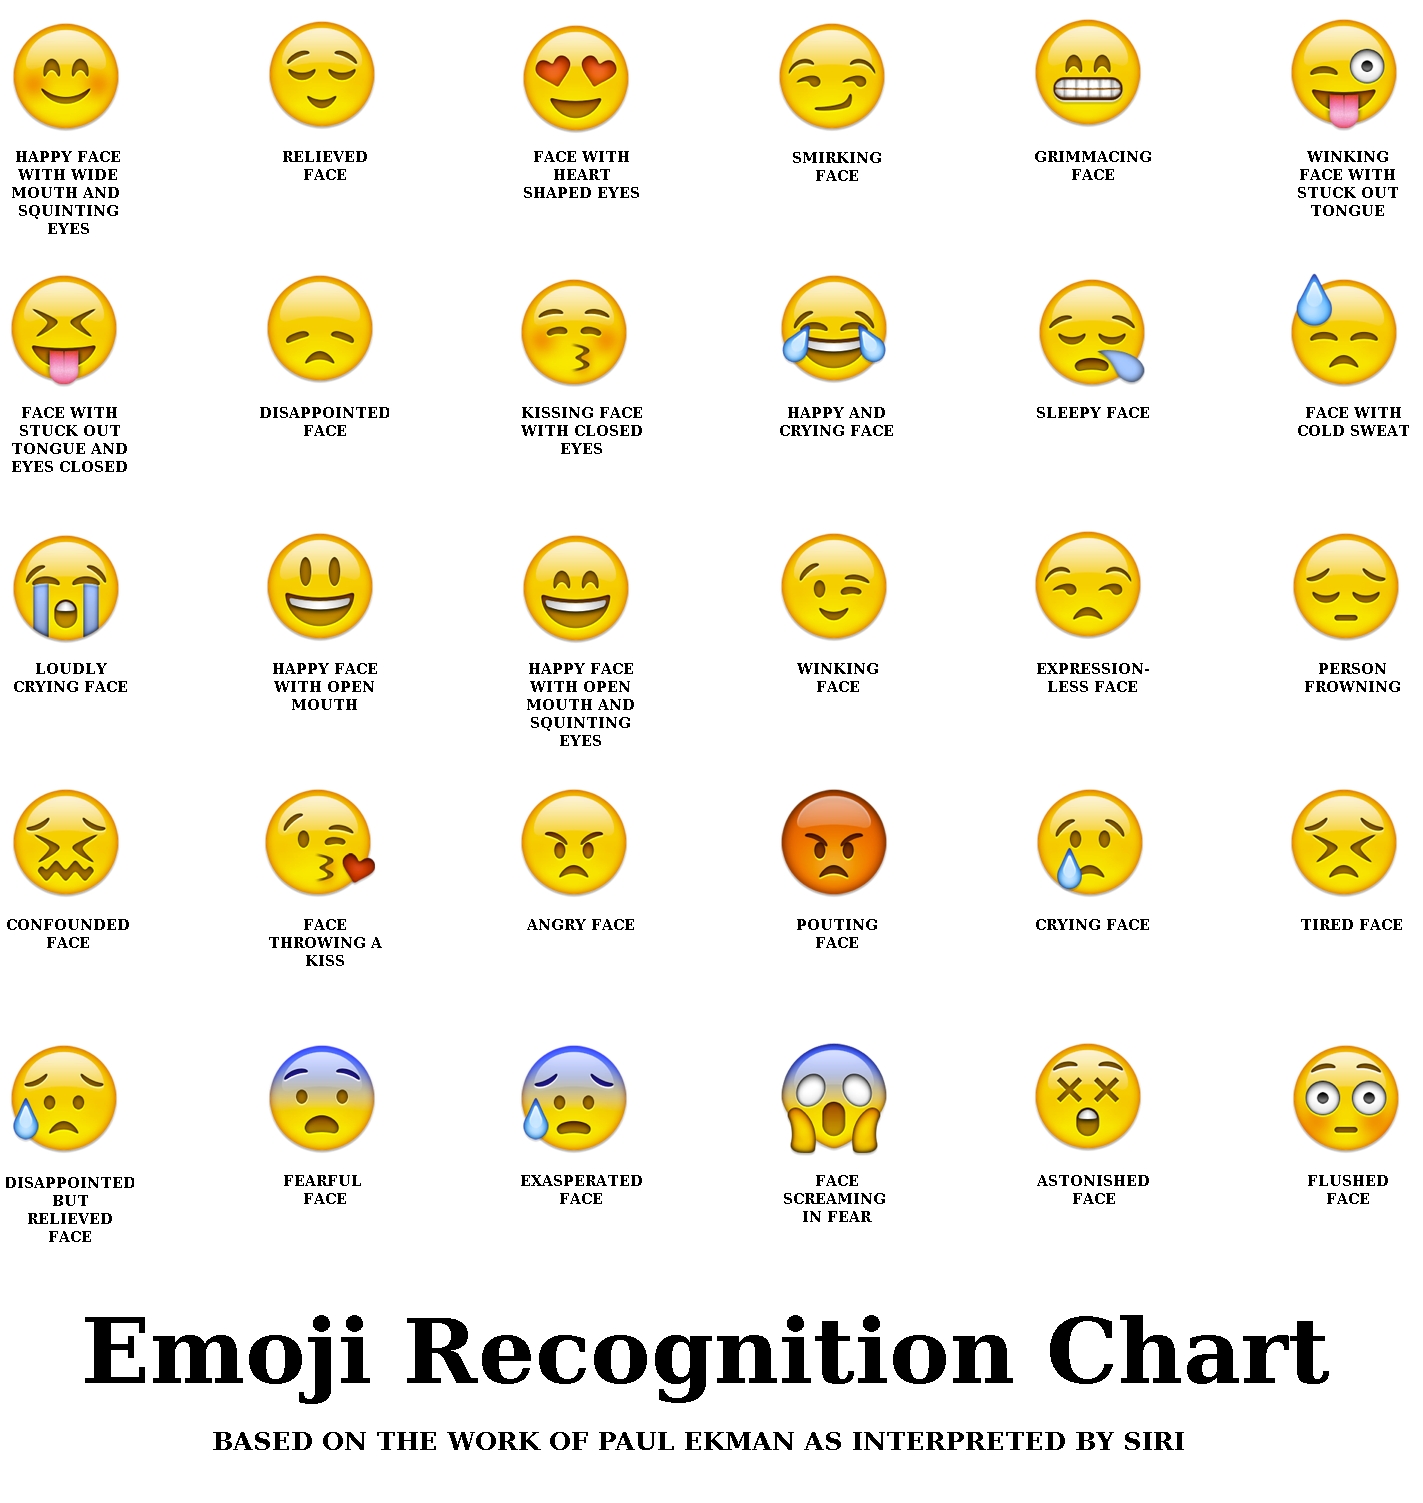 Emoji Smiley-Face Meanings